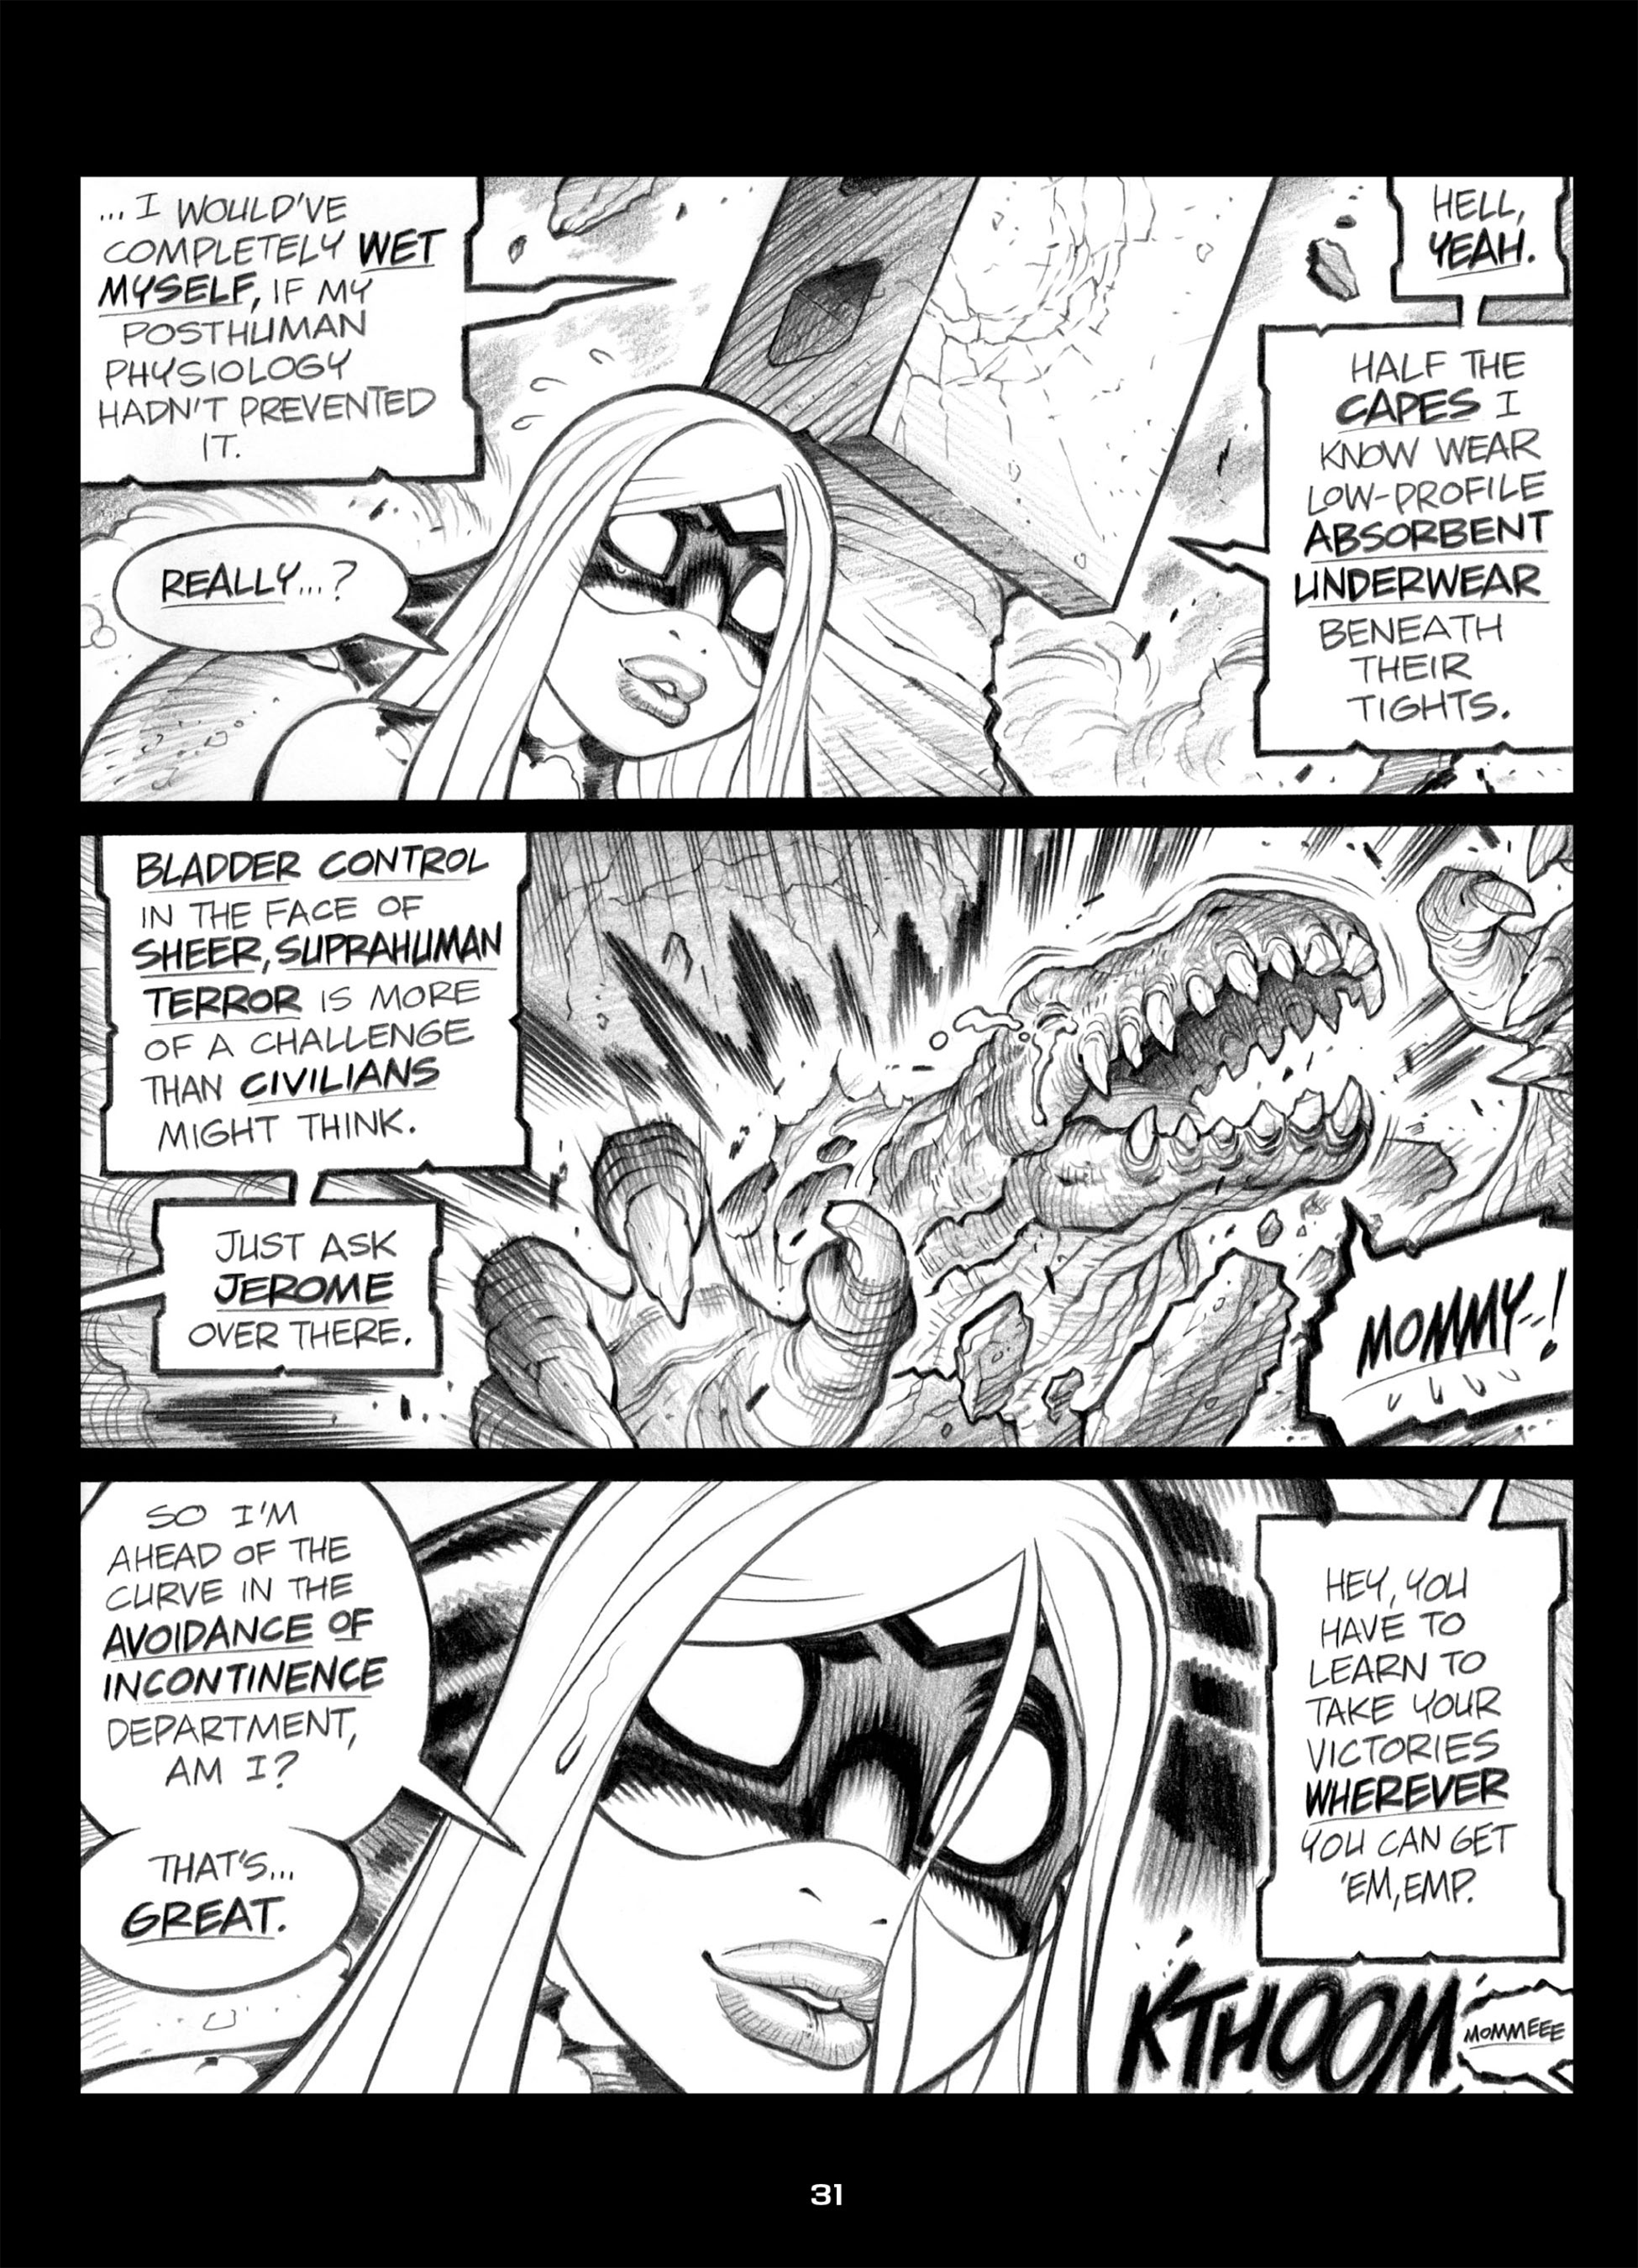 Read online Empowered comic -  Issue #2 - 31